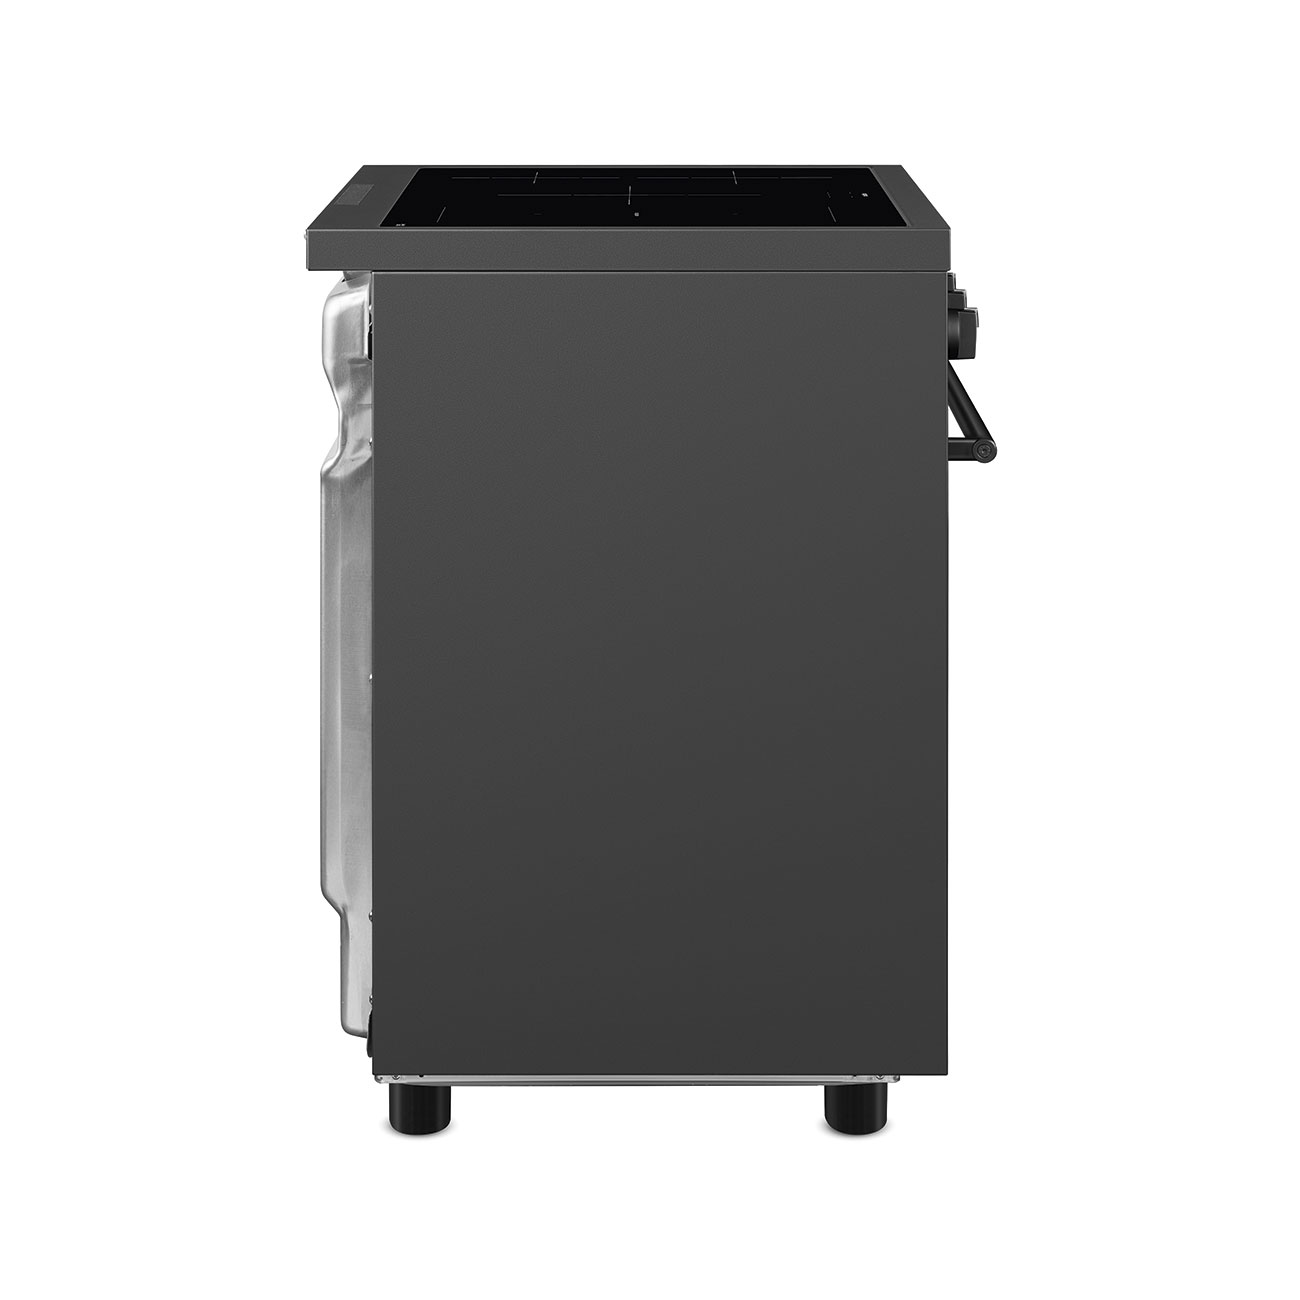 Smeg Anthracite Cooker with Induction Hob_10